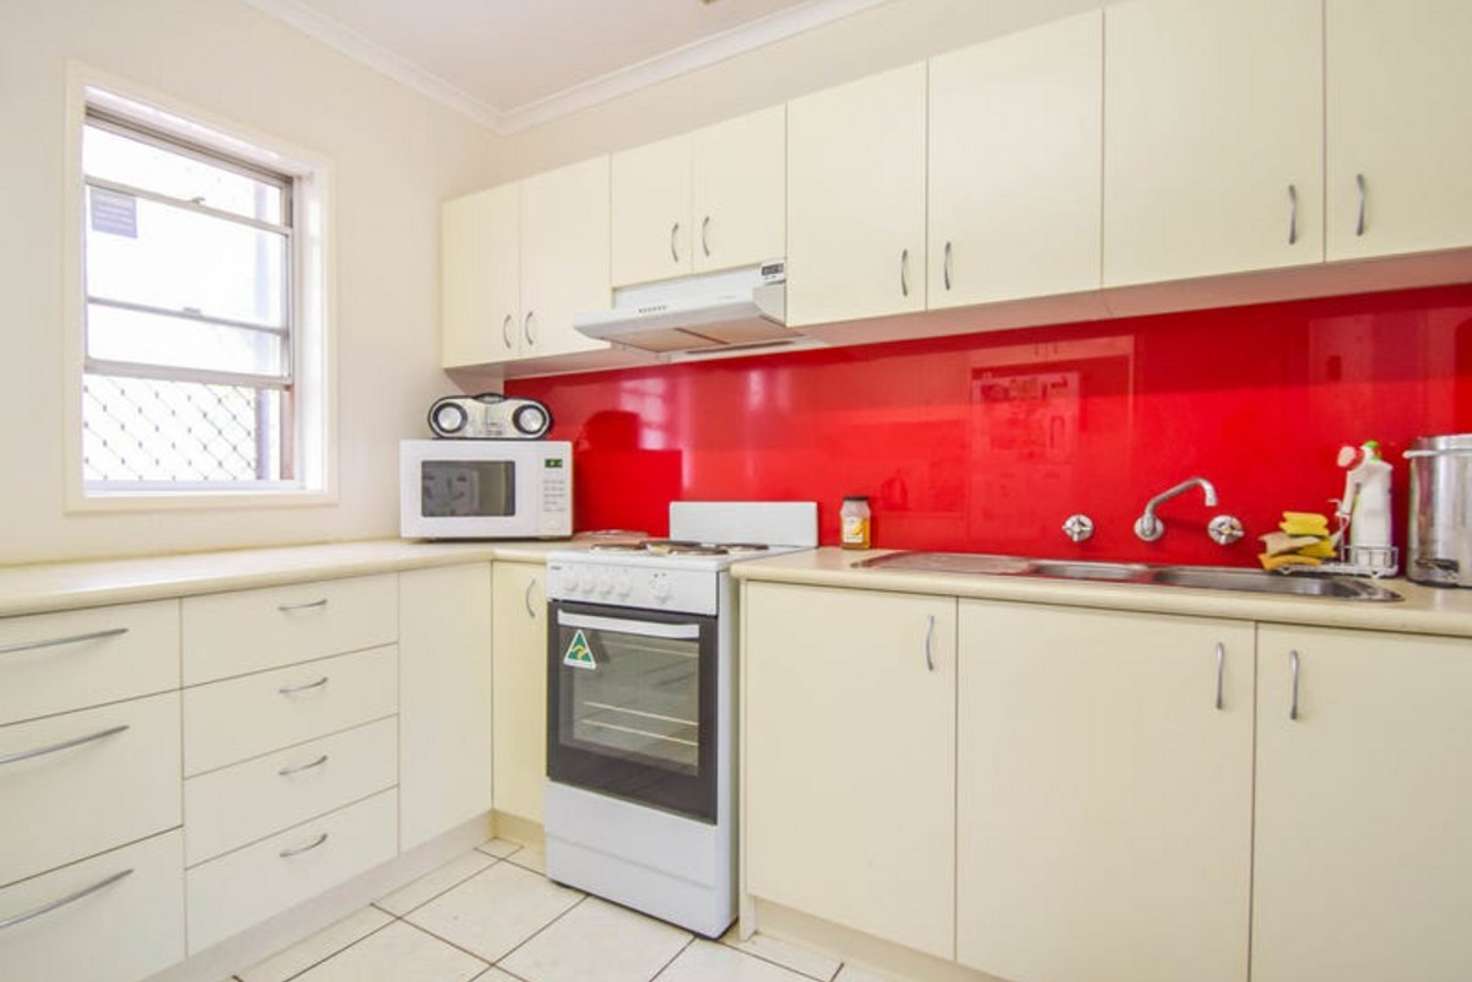 Main view of Homely house listing, 2 Angus Way, South Hedland WA 6722